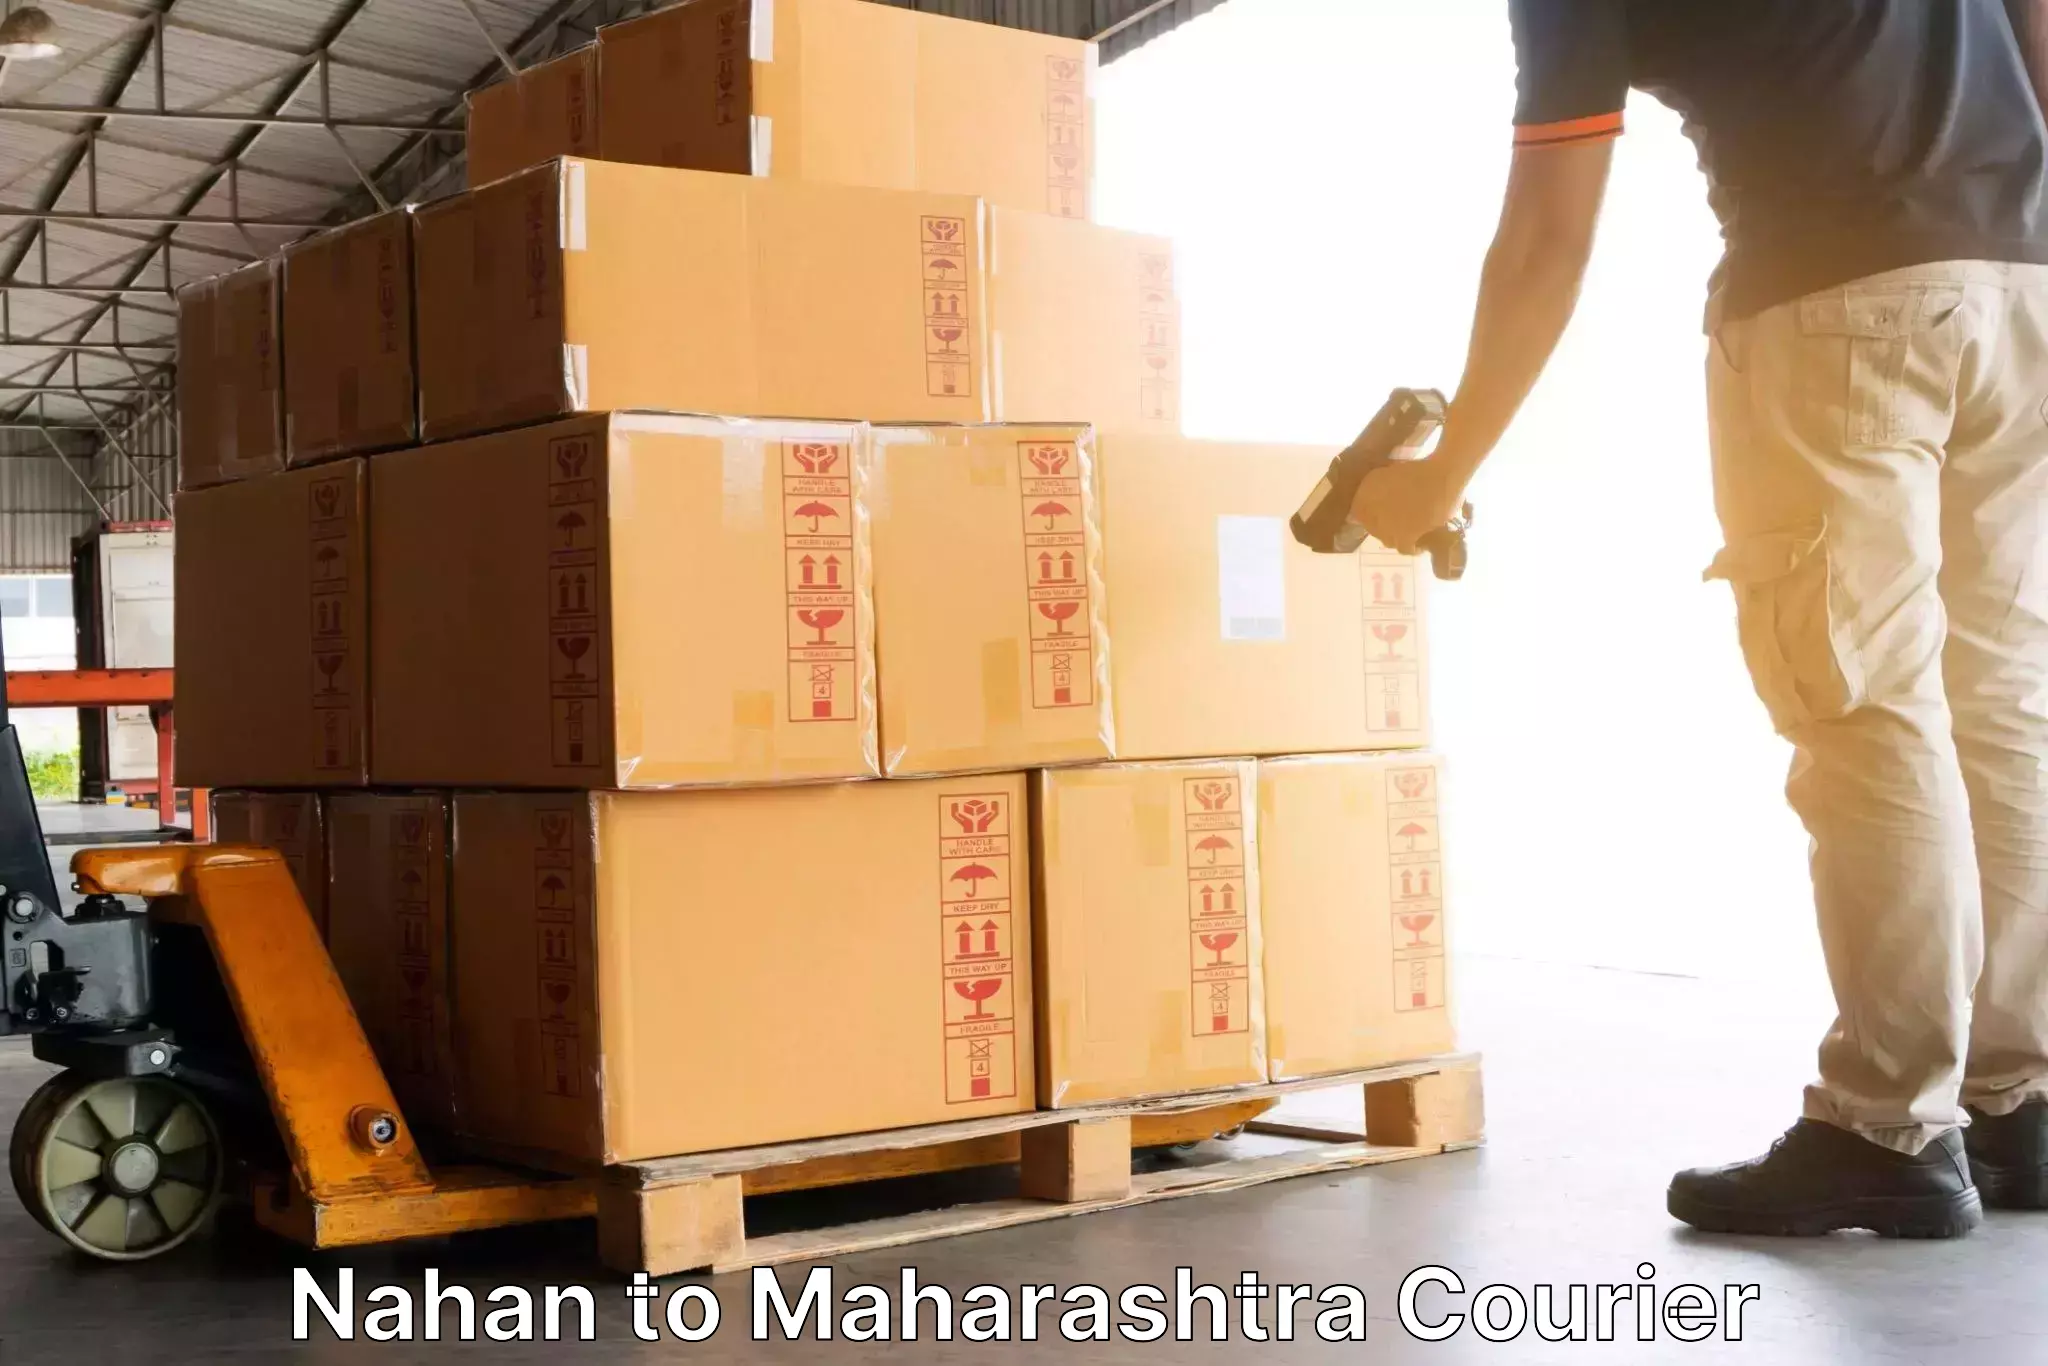 Personal parcel delivery in Nahan to Raigarh Maharashtra